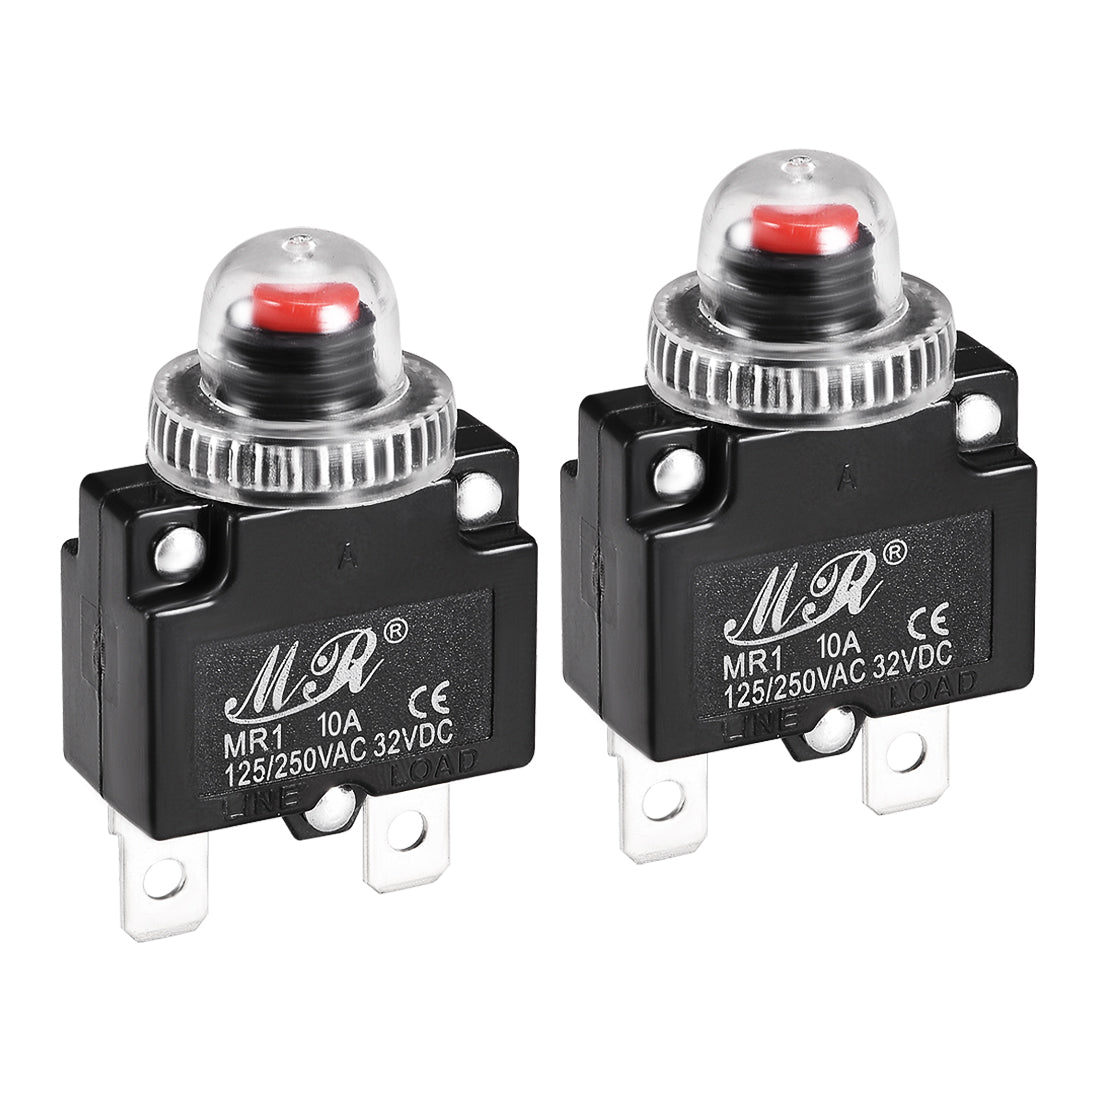 uxcell Uxcell Thermal Circuit Breakers 10A 125/250V AC 32V DC Push Button Reset Overload Protector Switch with Waterproof Cap 2 Pcs